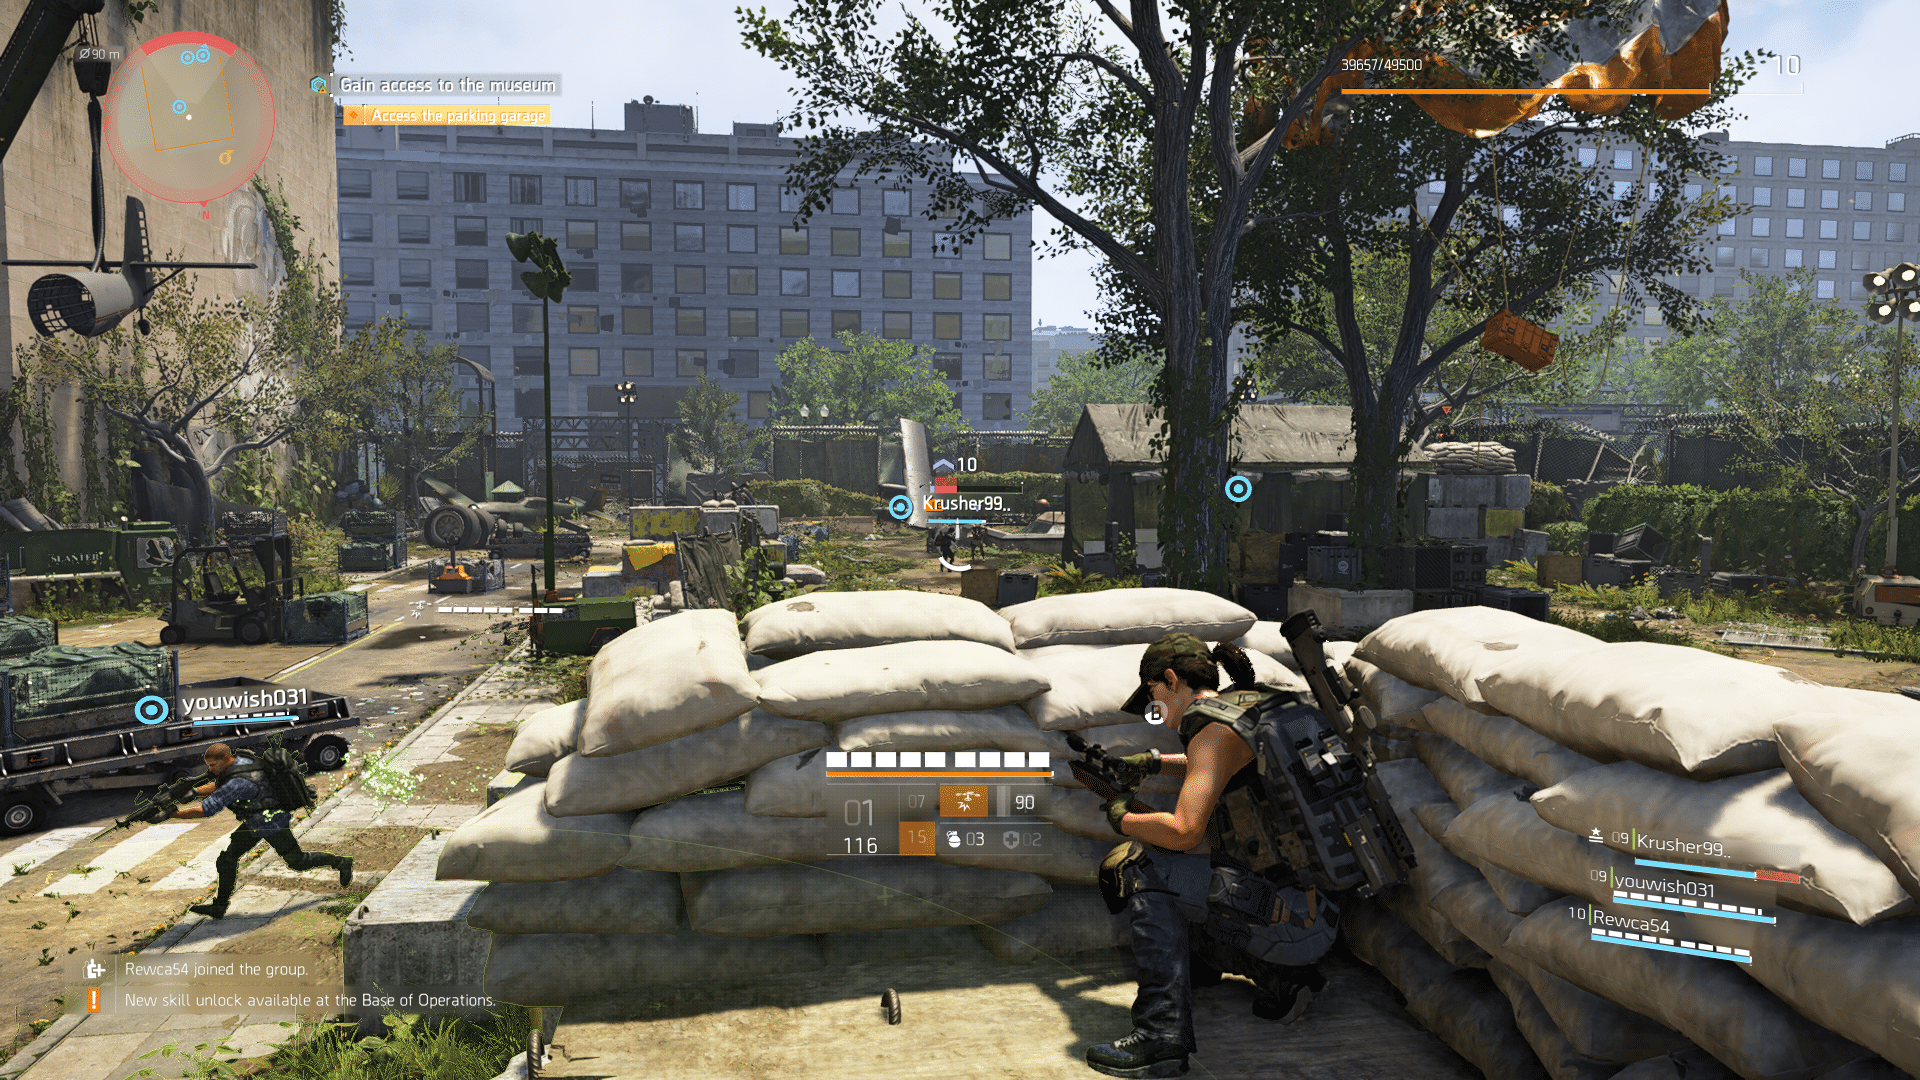 TheDivision2 3 30 2019 11 18 49 PM 3